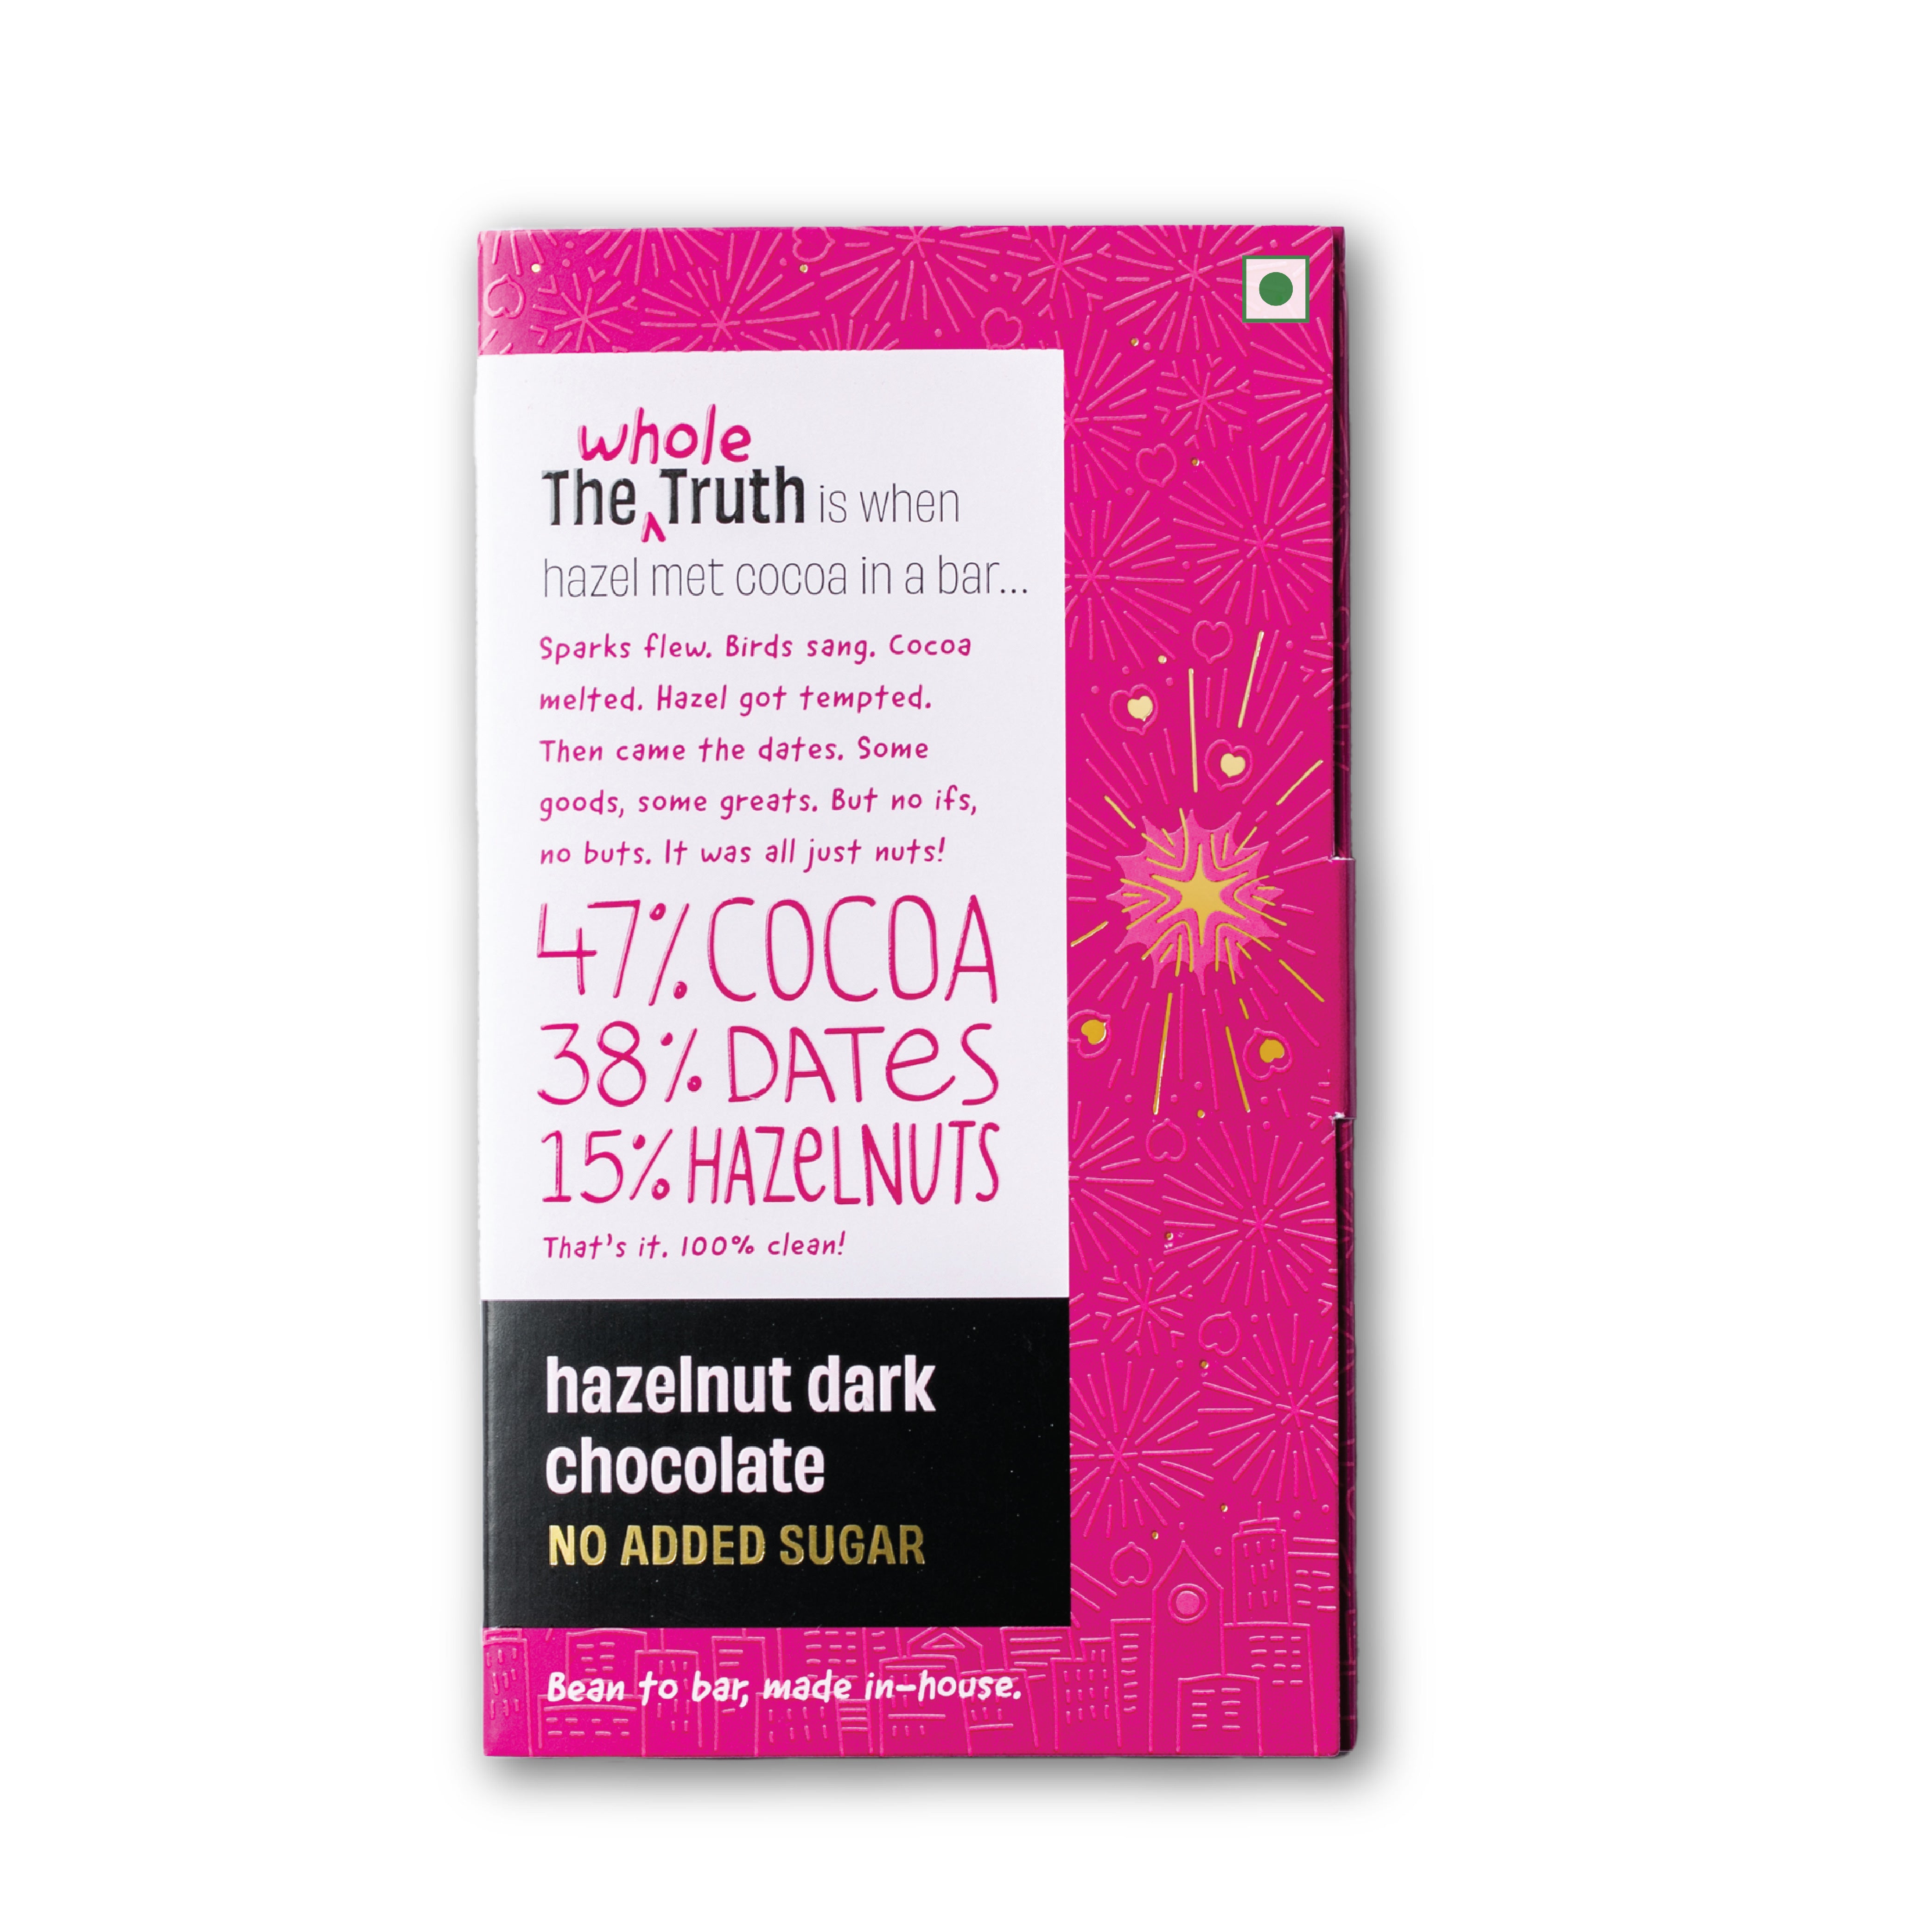 The Whole Truth Dark Chocolate - Hazelnut | Pack of 2 x80g | No Added Sugar |Sweetened Only with Dates |47% Cocoa, 38% Dates, 15% Hazelnuts | No Artificial Flavours | Portion Controlled